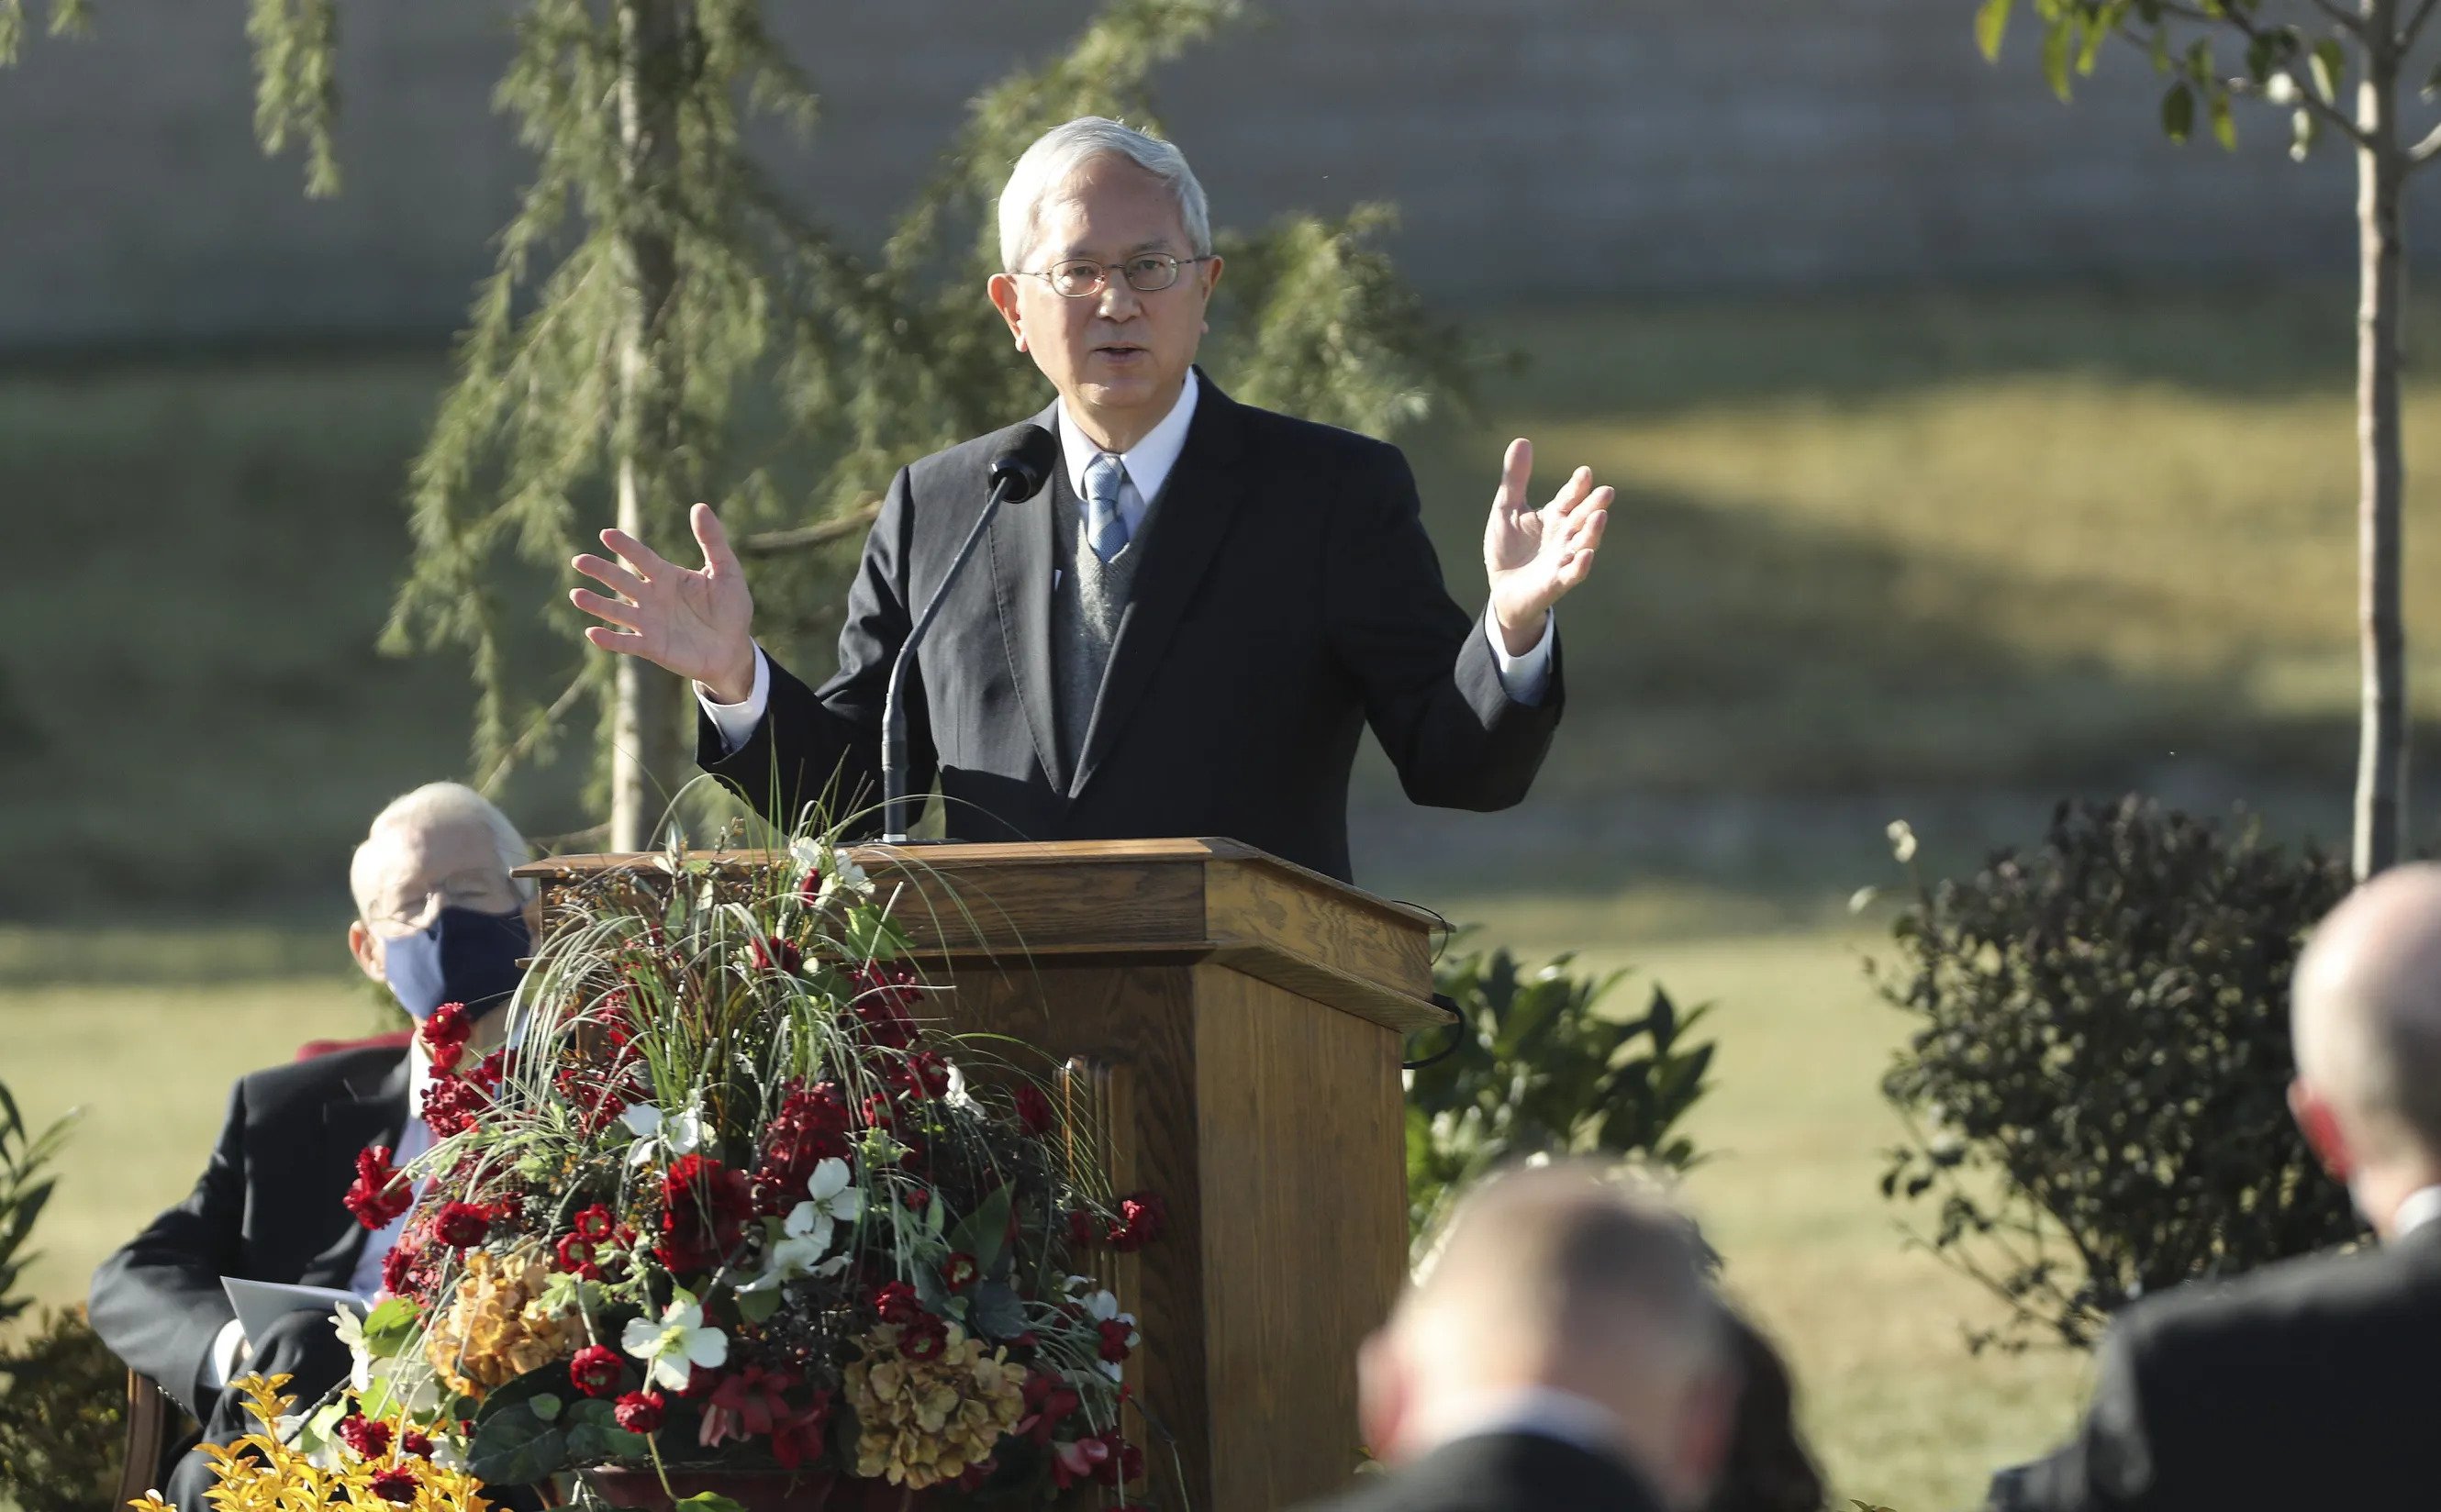 Elder Gong wearing a suit and tie and speaking from a pulpit outside with his hands pointed outward.